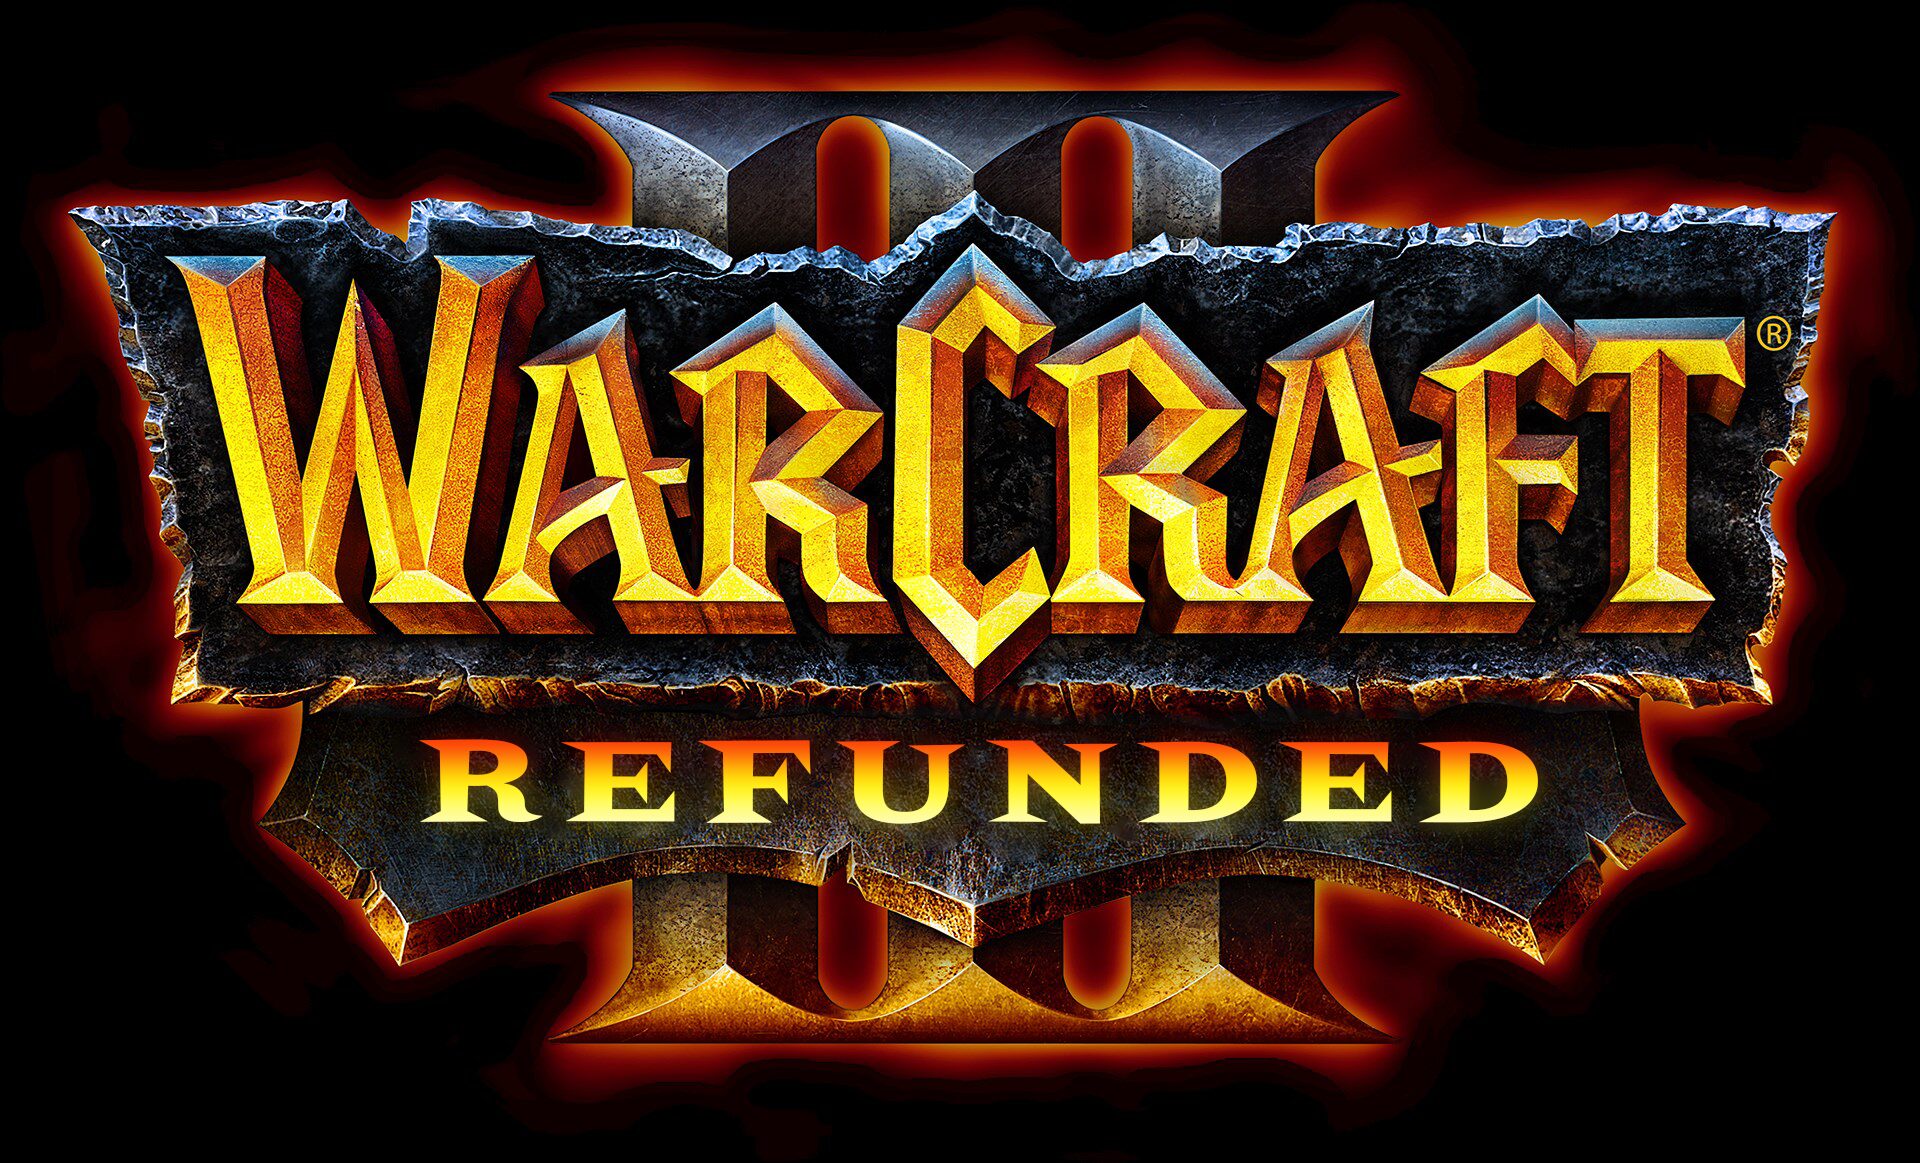 Warcraft III Reforged Is A Disaster; Forces Changes On Classic Warcraft III